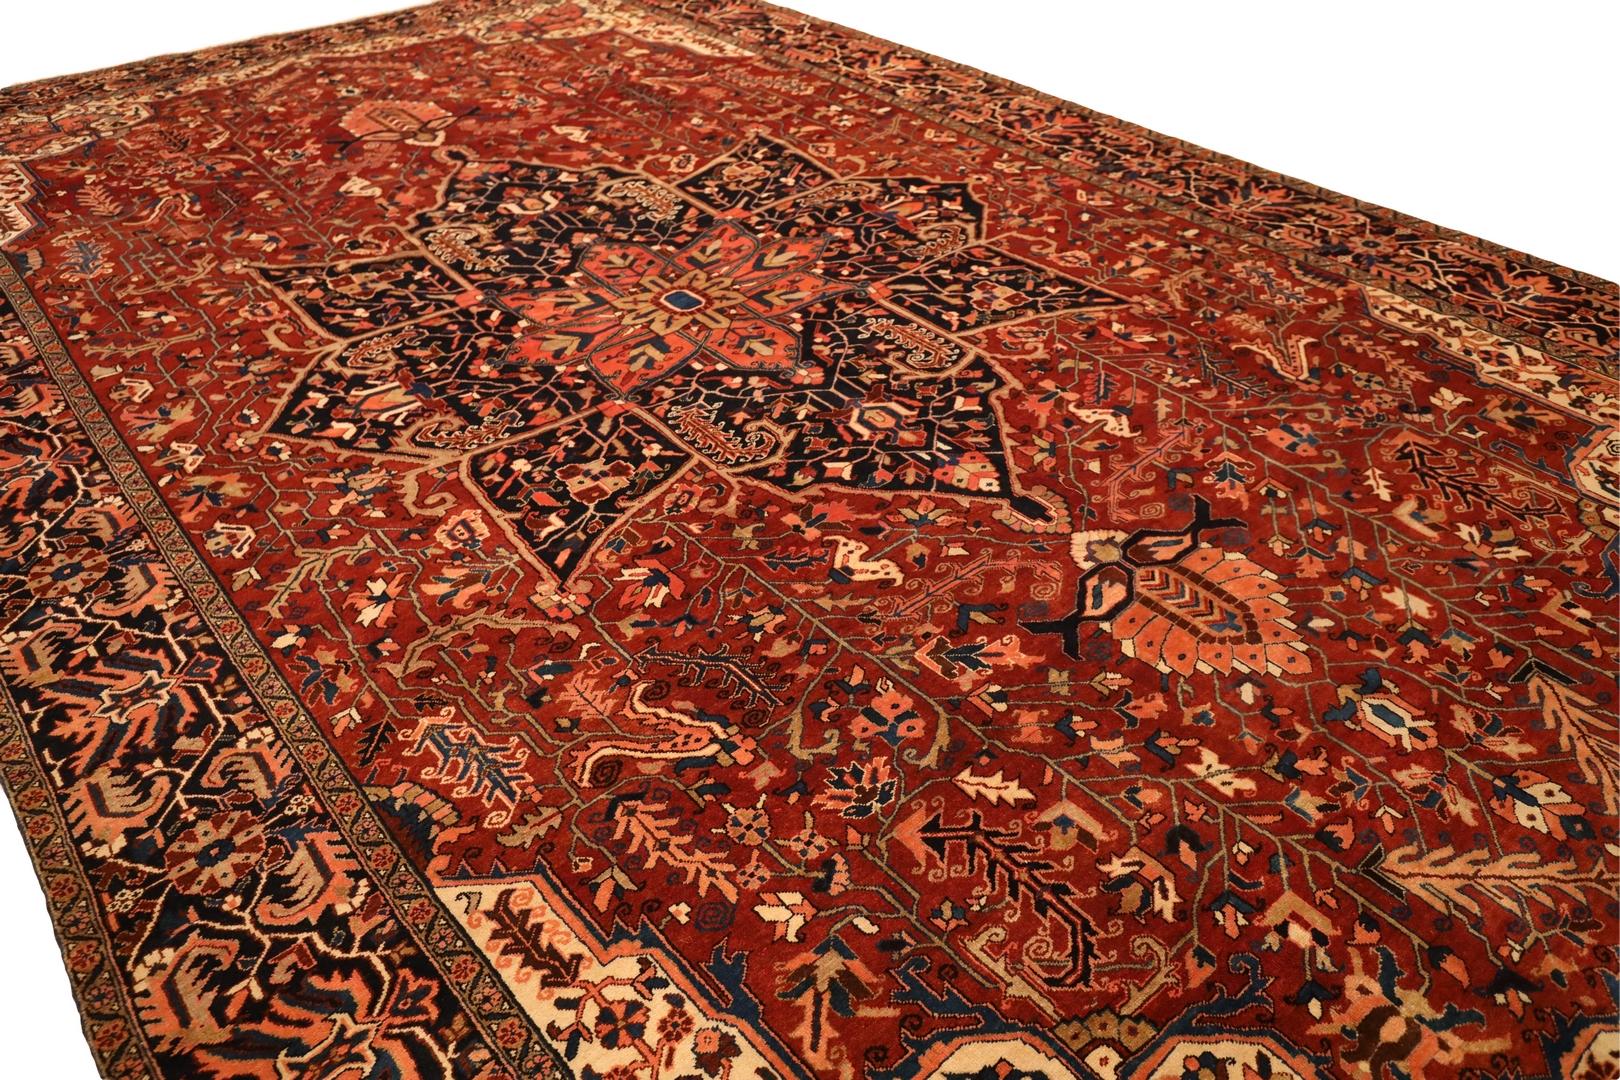 Hand-Knotted Heriz Room-Size Antique Rug - 11'5